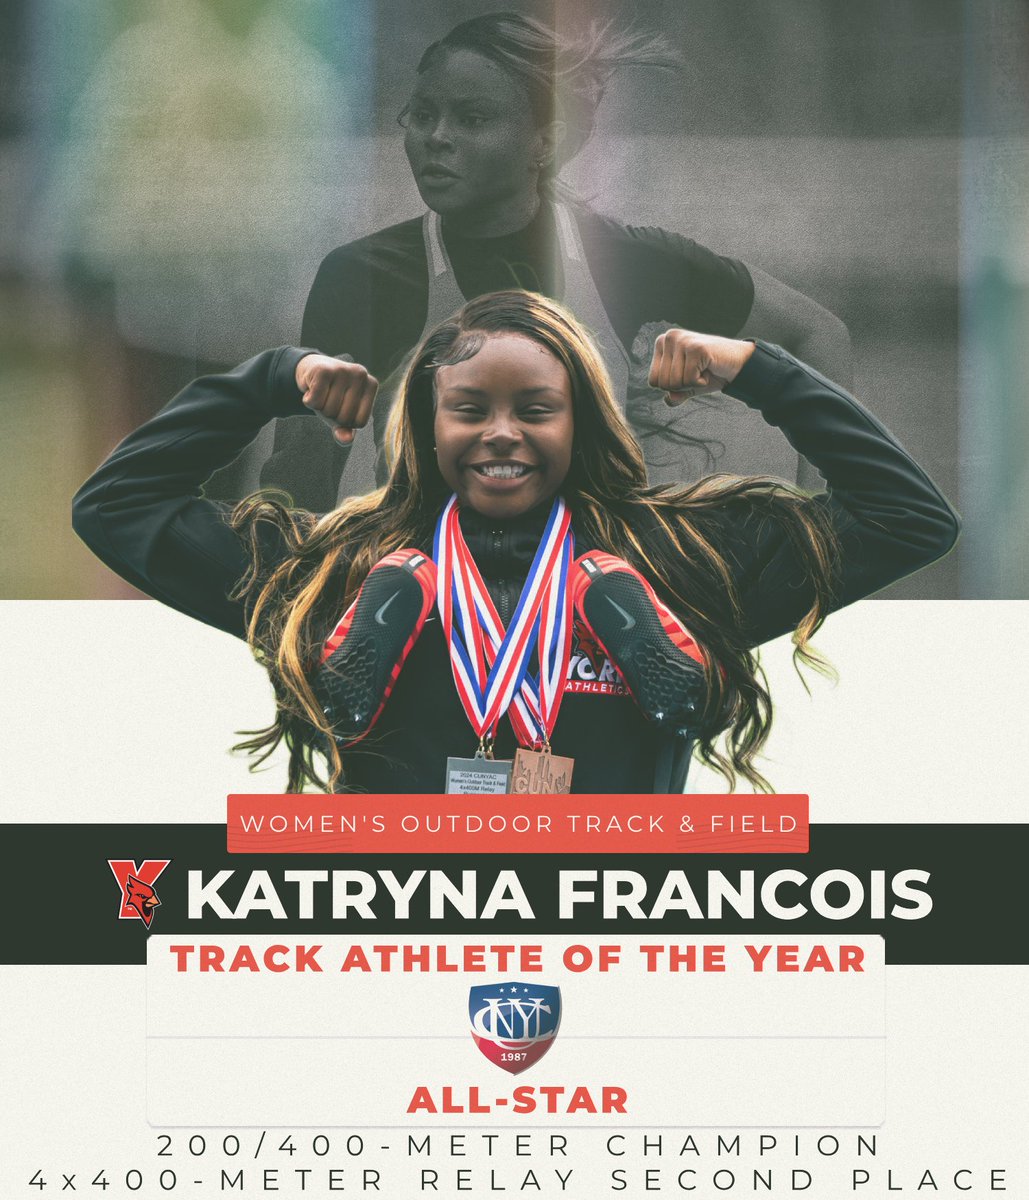 Let’s get the awards rolling! Congrats to 𝗞𝗔𝗧𝗥𝗬𝗡𝗔 𝗙𝗥𝗔𝗡𝗖𝗢𝗜𝗦 for becoming the 2024 @CUNYAC Women's Outdoor Track & Field Athlete of the Year ❌ an All-Star❗️

📰🔗 ow.ly/LcsL50RG6y8

#YCCardinals #RiseAbove #TheCardinalWay #TheCityPlaysHere #d3tf #NCAAD3